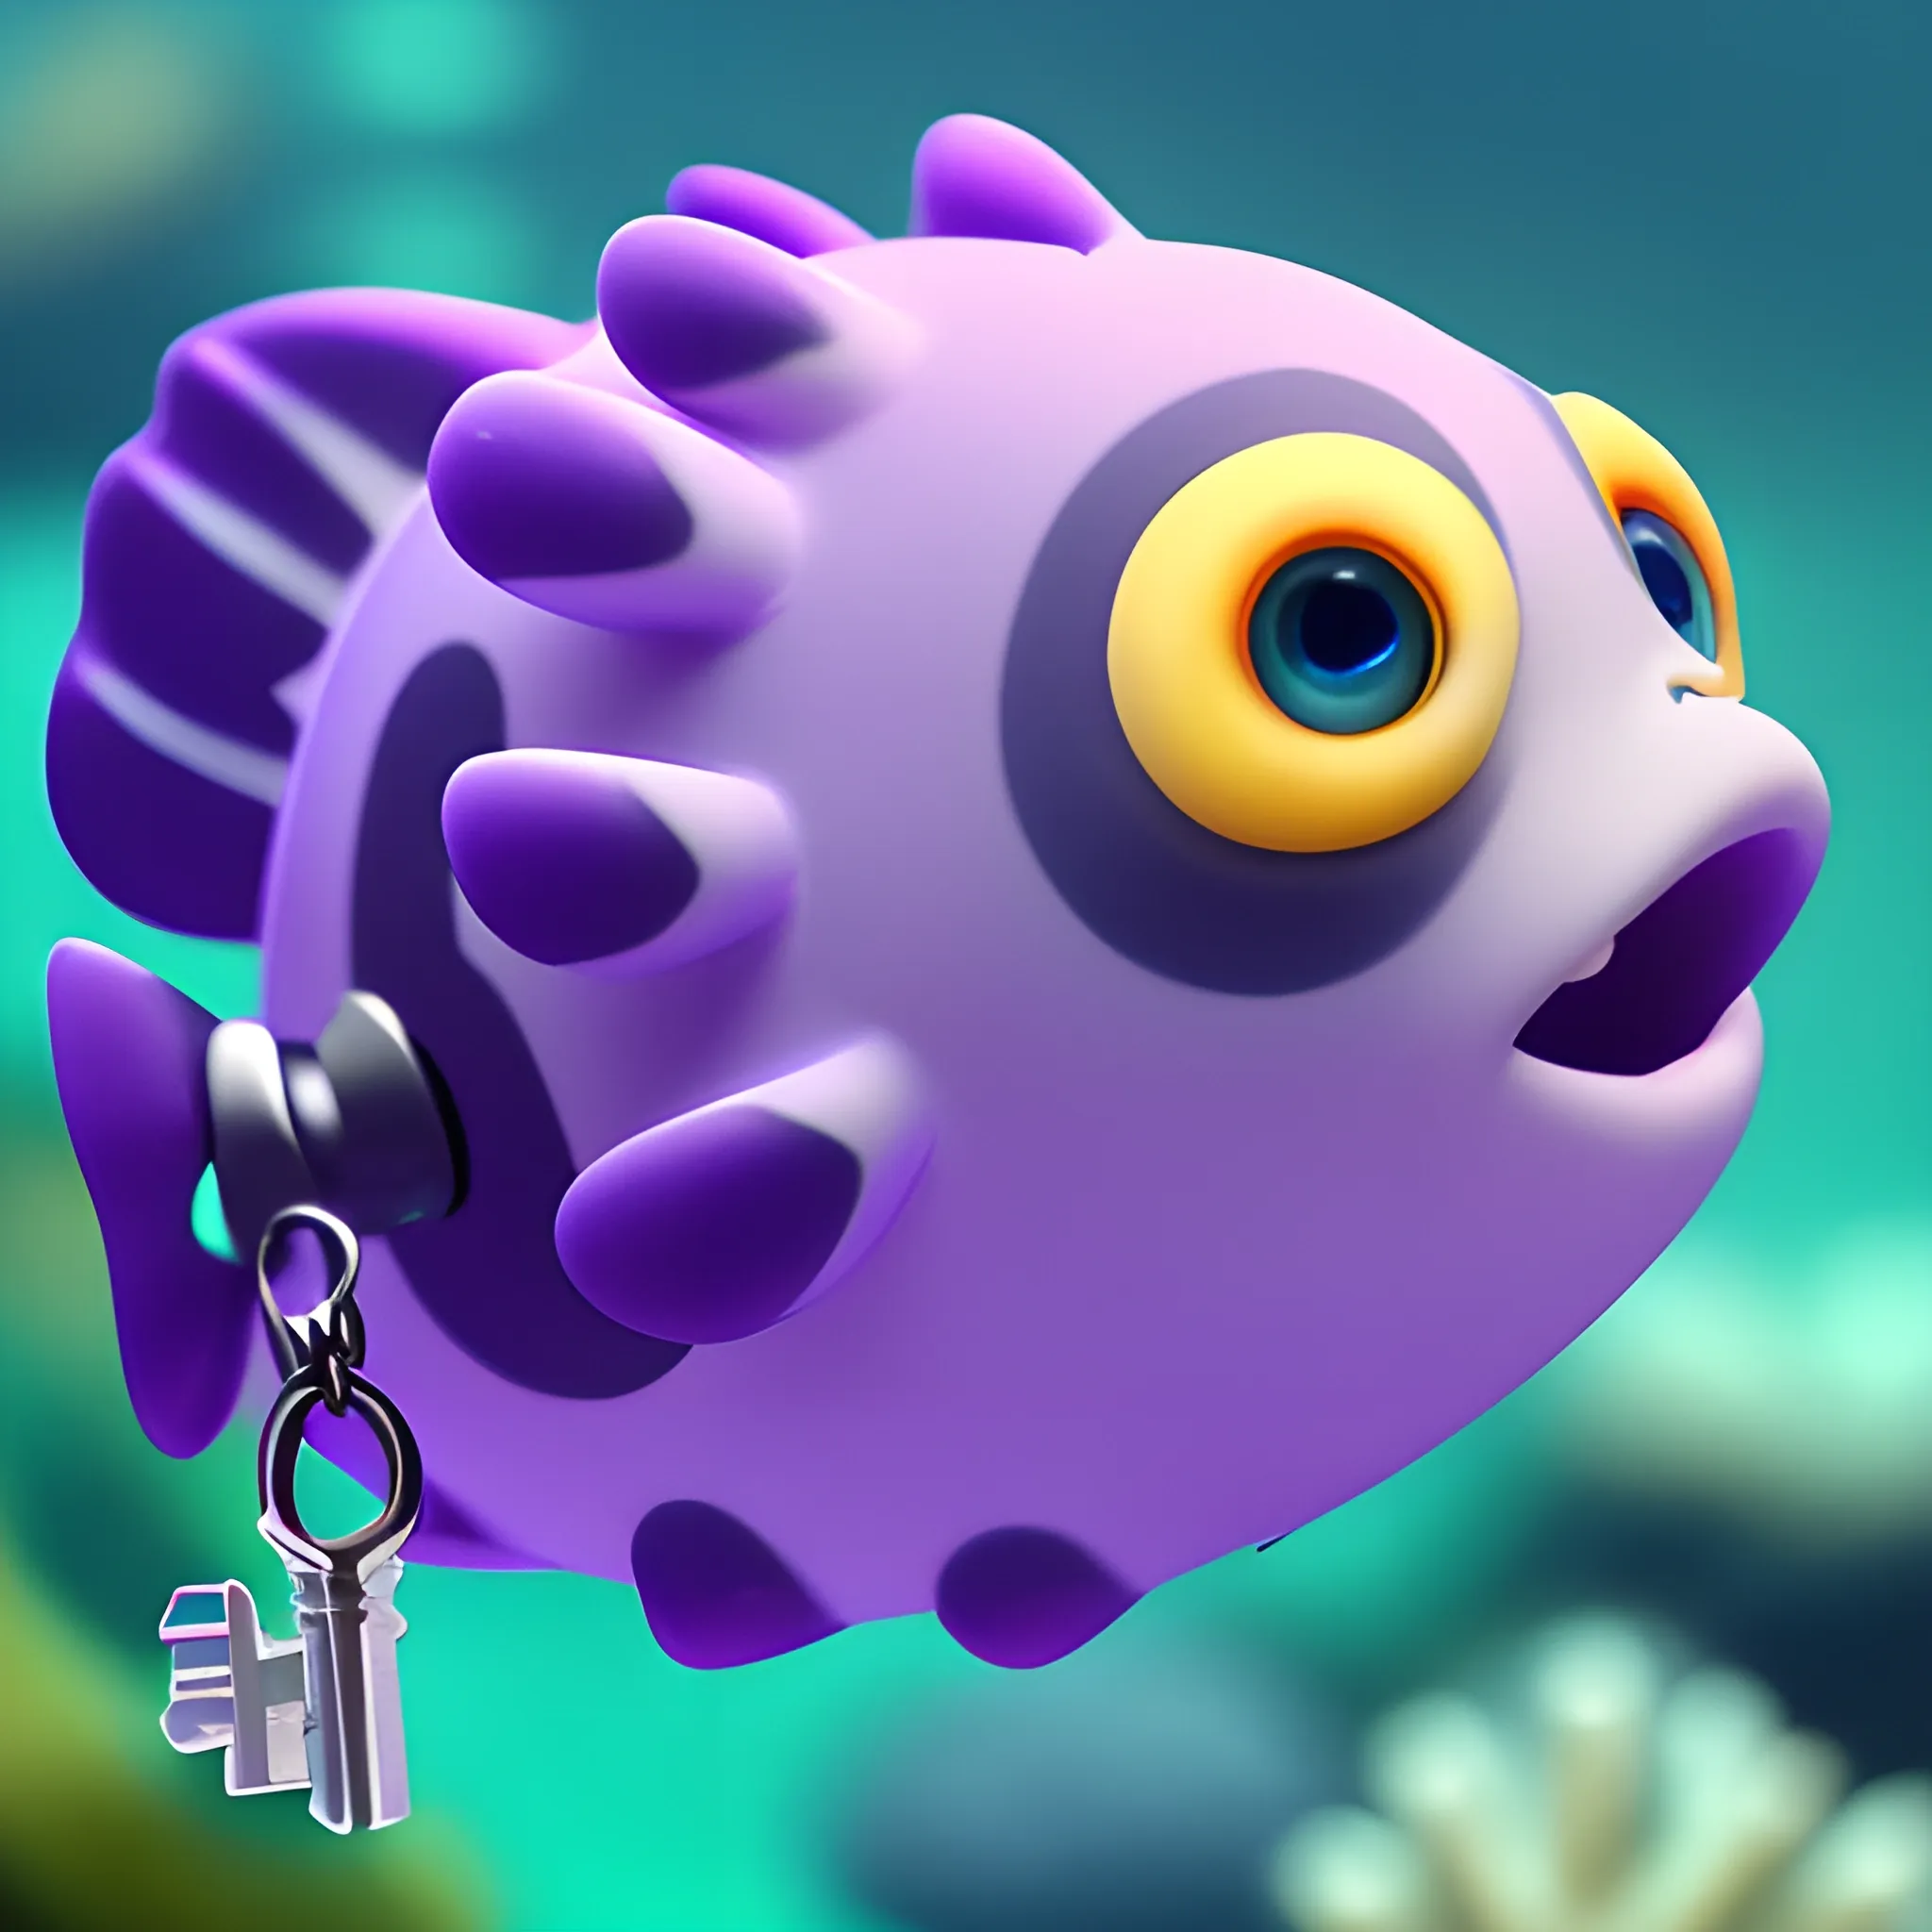 A cute purple puffer fish holding a key in its left fin and two ethereum coins in its right fin